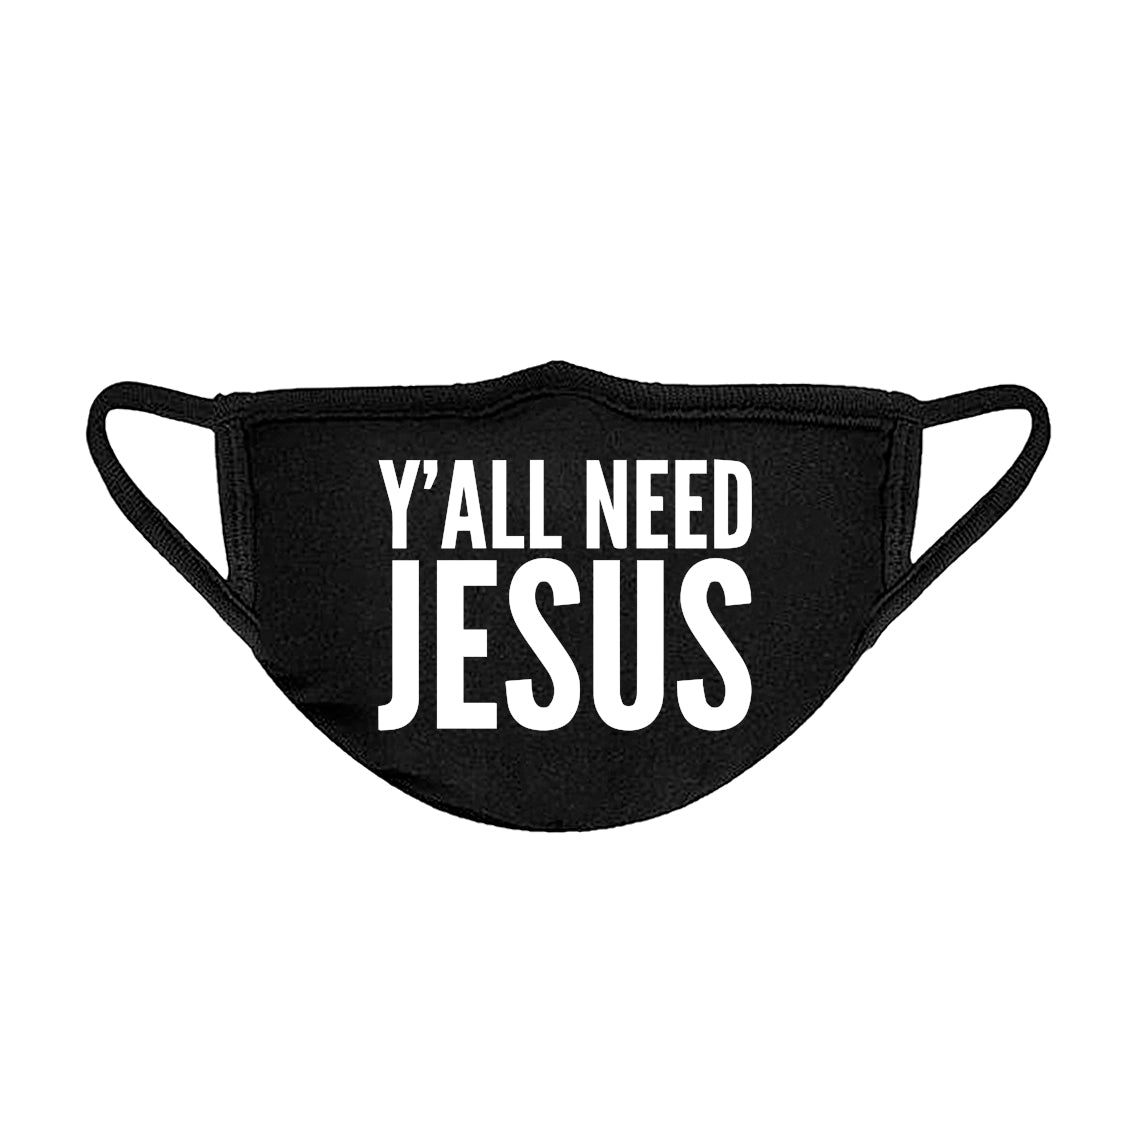 Y'ALL NEED JESUS Unisex Face Mask